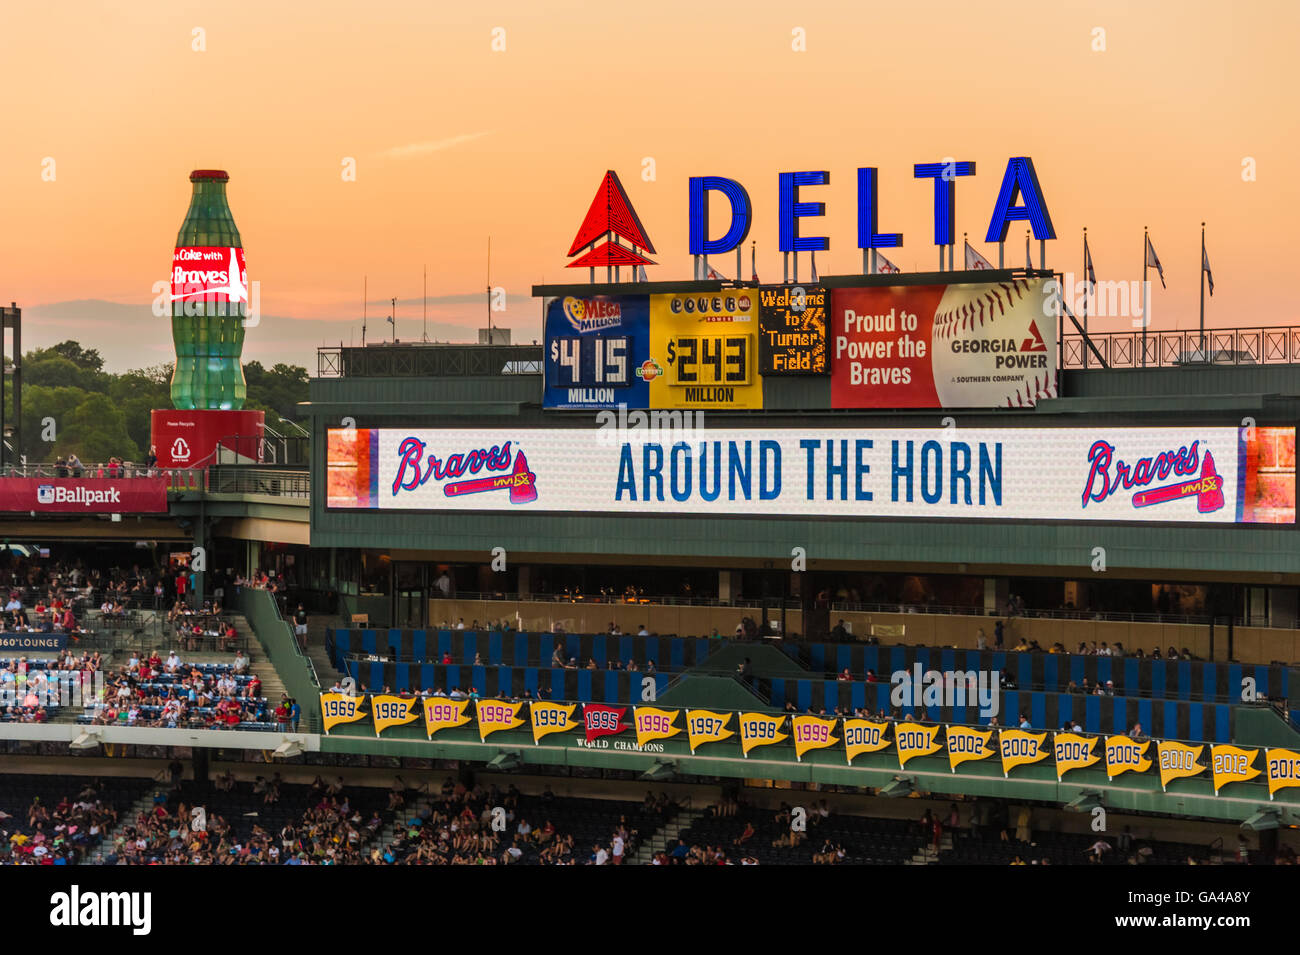 Icons of Atlanta – Coca-Cola, Delta Airlines, and the Atlanta Braves – at Turner Field against a colorful sunset sky. Stock Photo